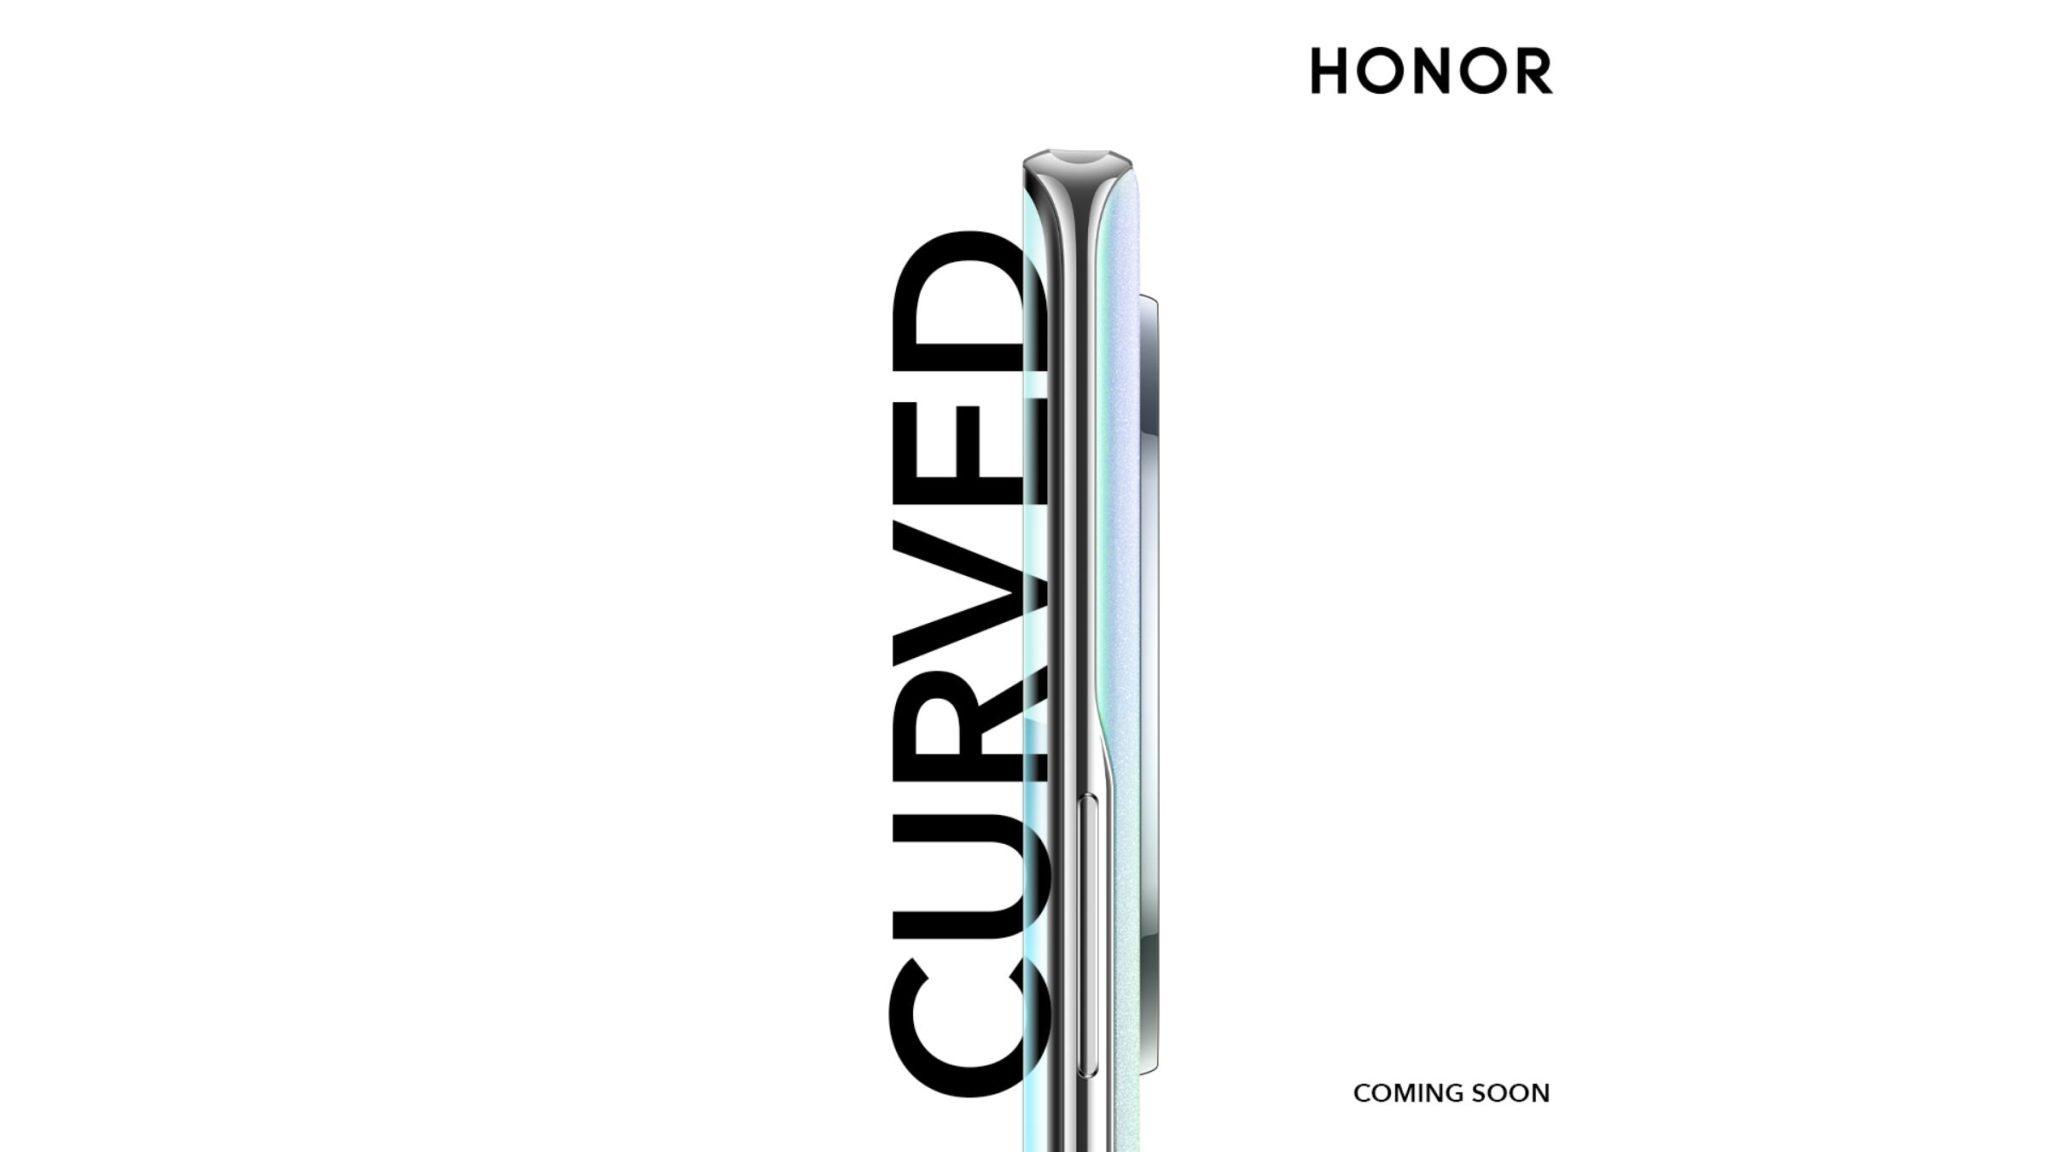 HONOR Phone with Premium Curved OLED Header